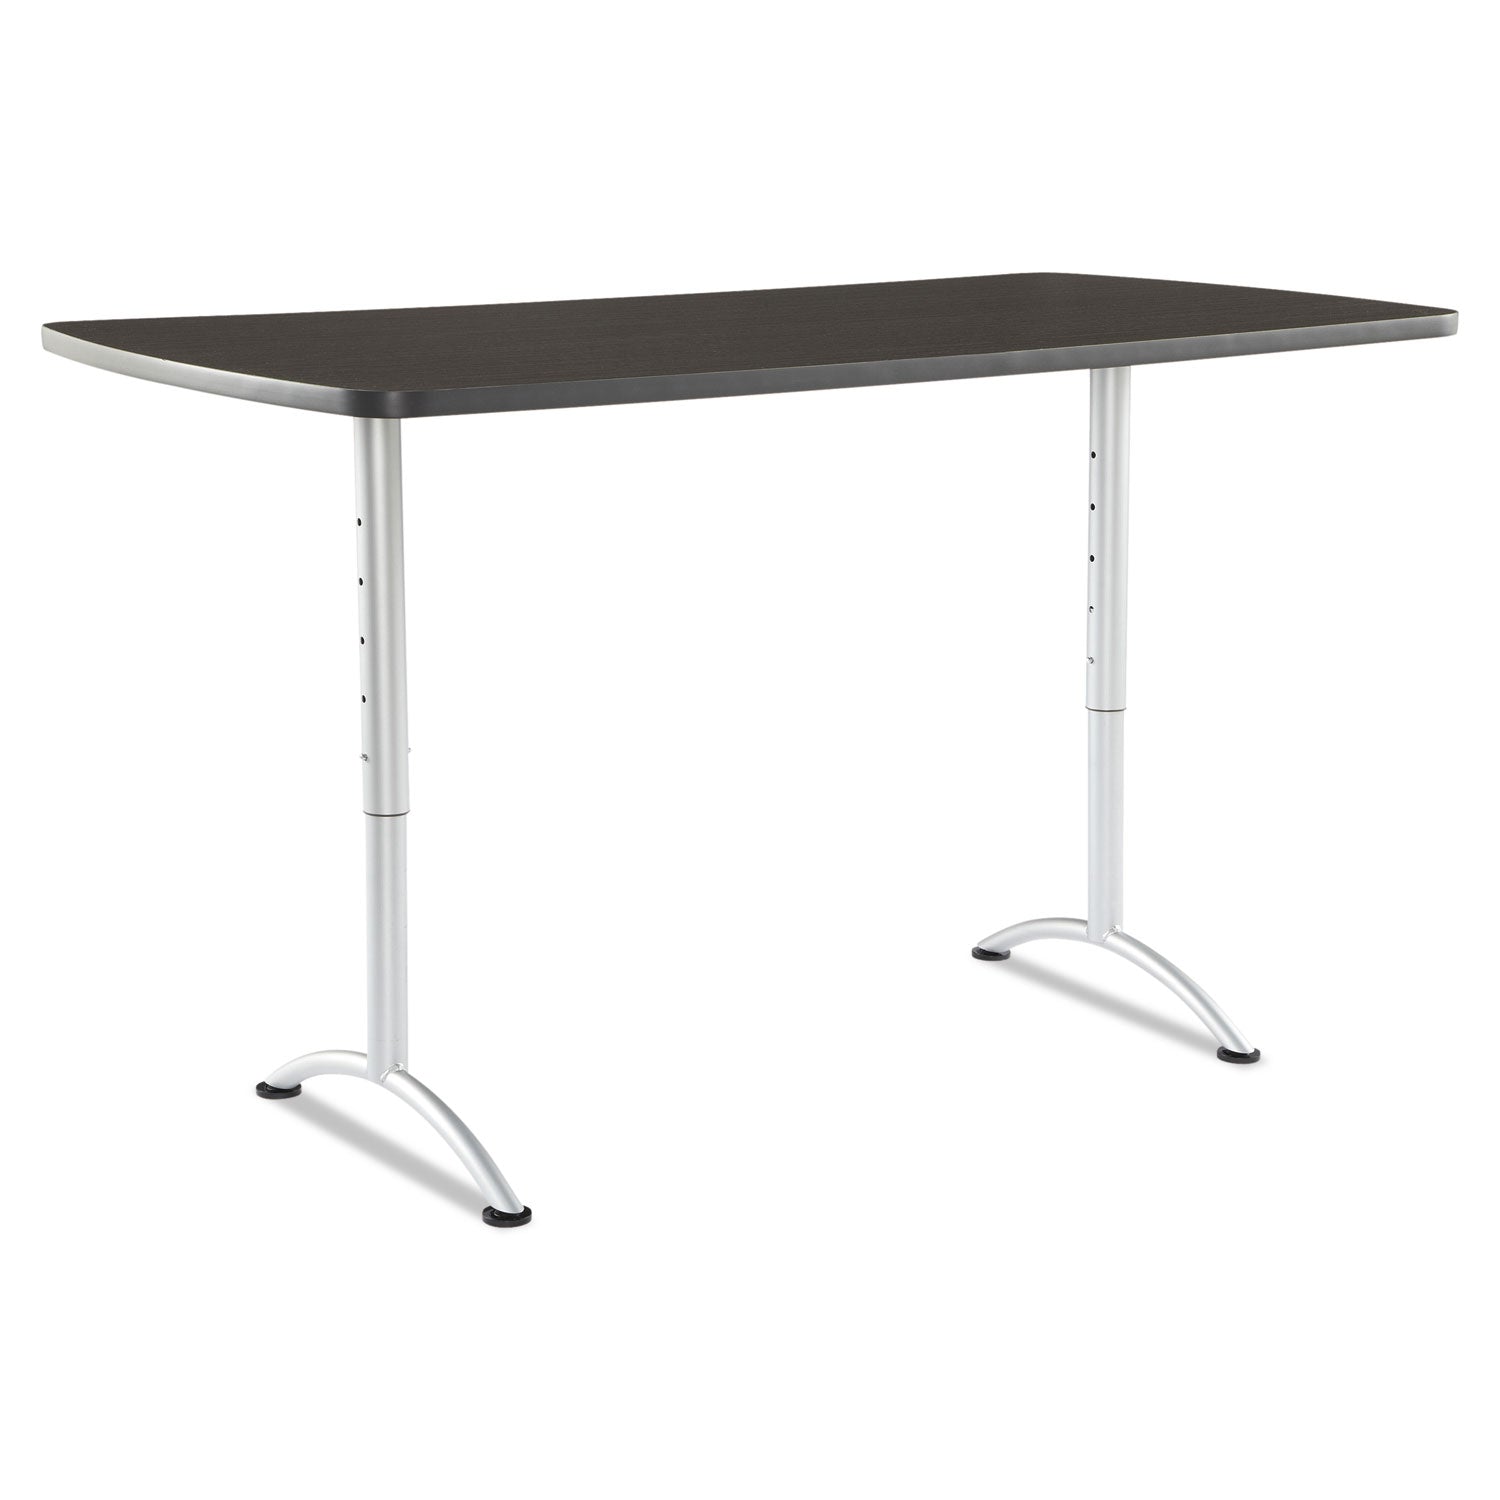 ARC Adjustable-Height Table, Rectangular, 36" x 72" x 30 to 42", Gray Walnut Top, Silver Base - 